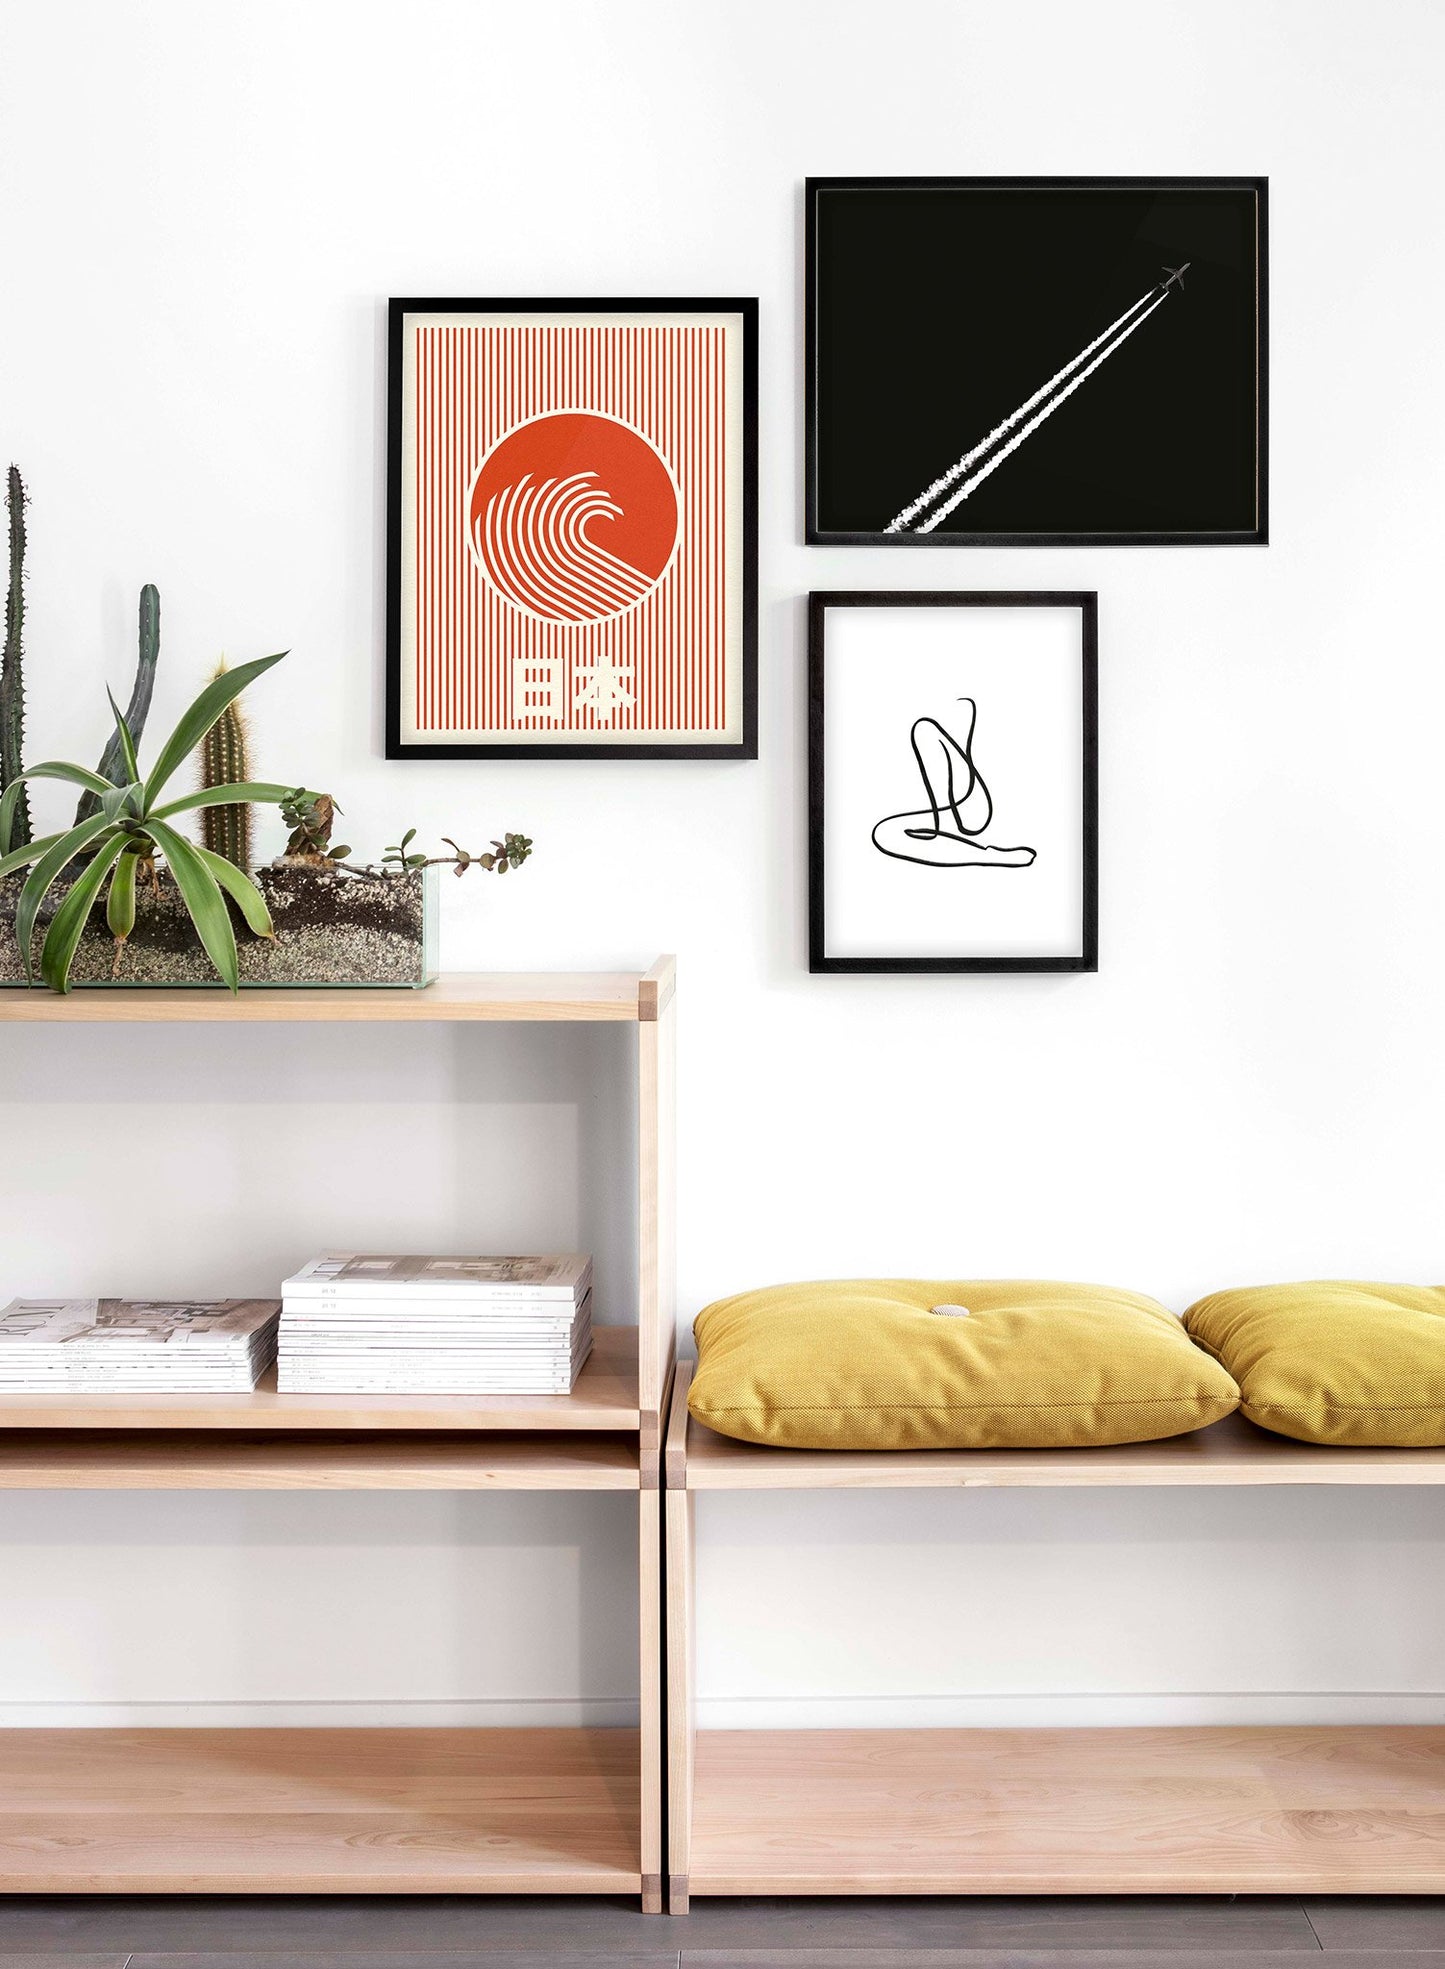 Minimalist pop art paper illustration by German artist Rosi Feist with Japanese style wave - Lifestyle Trio - Living Room